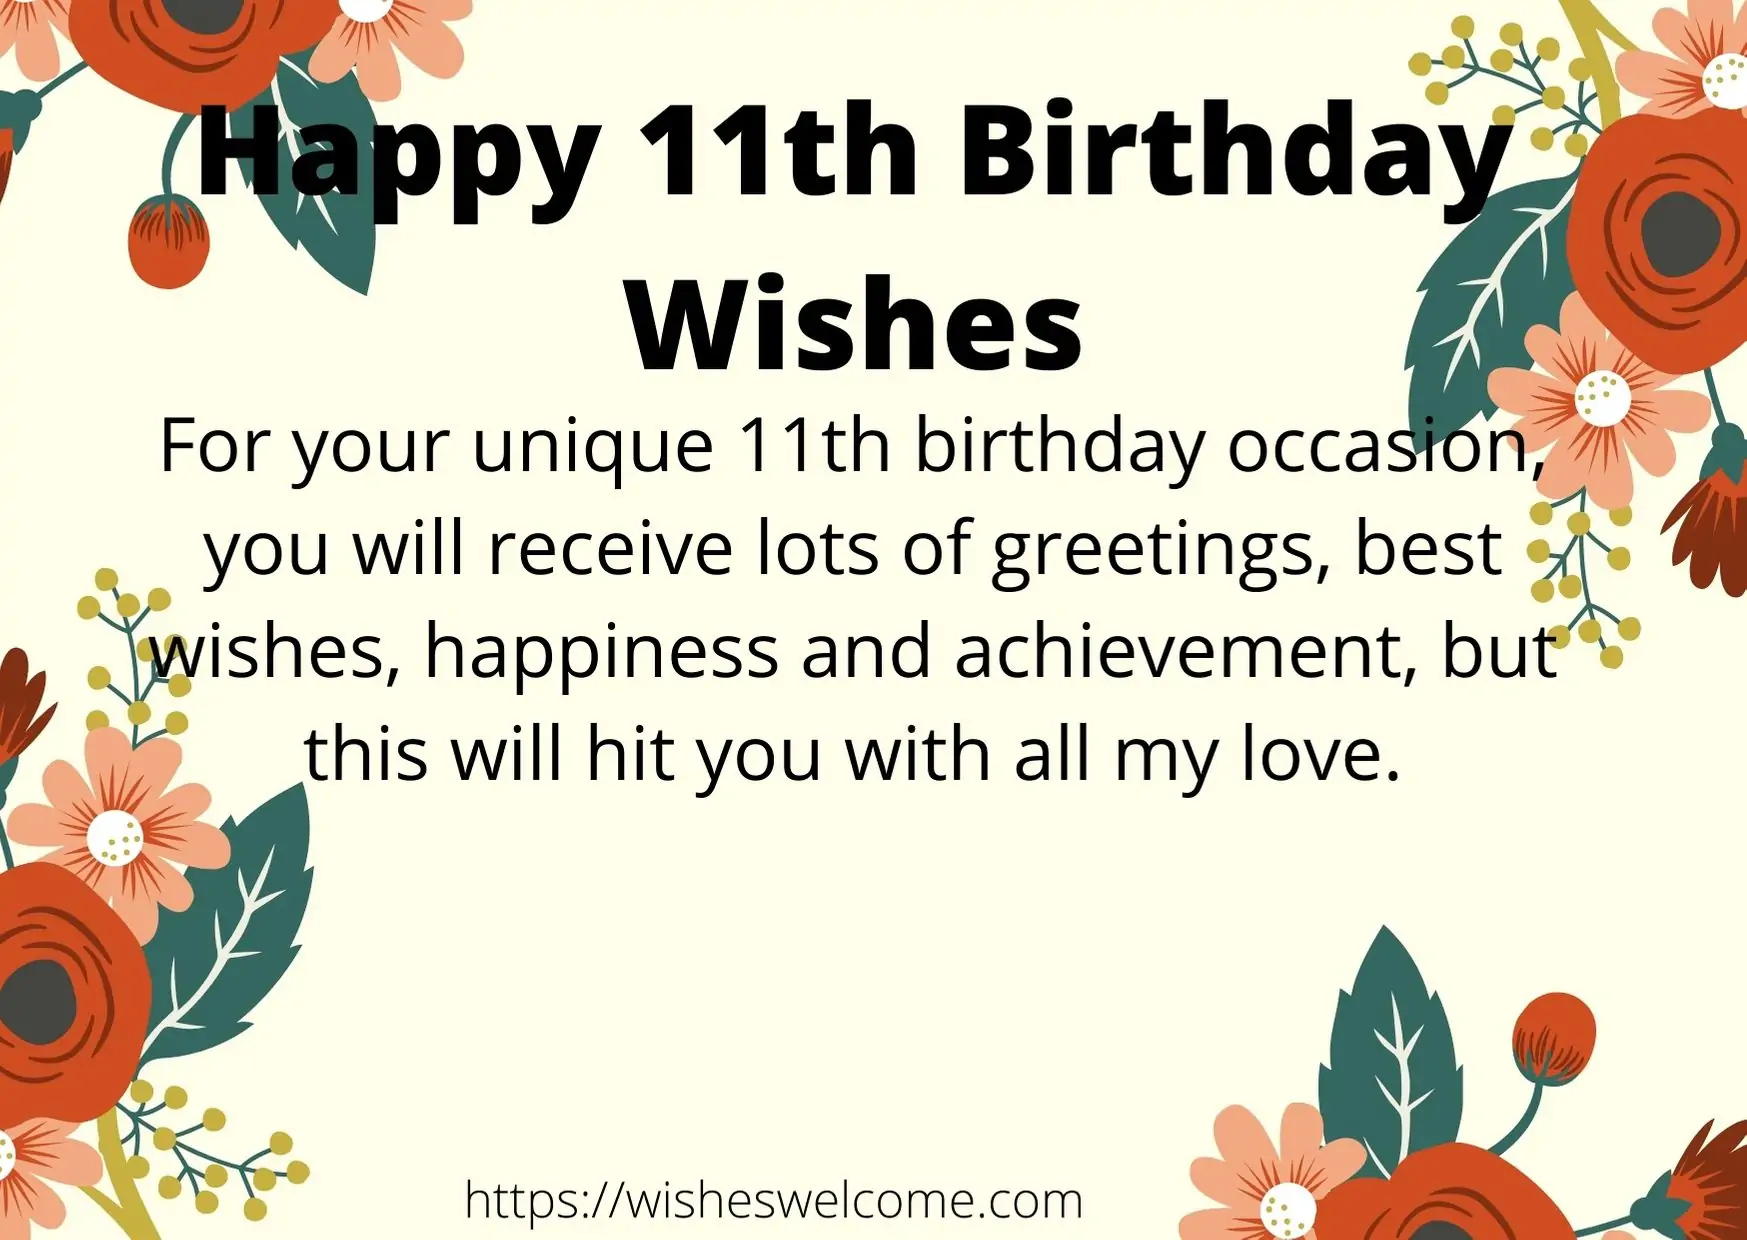 100+ Happy 11th birthday Wishes For Boy And Girl - Welcome Wishes